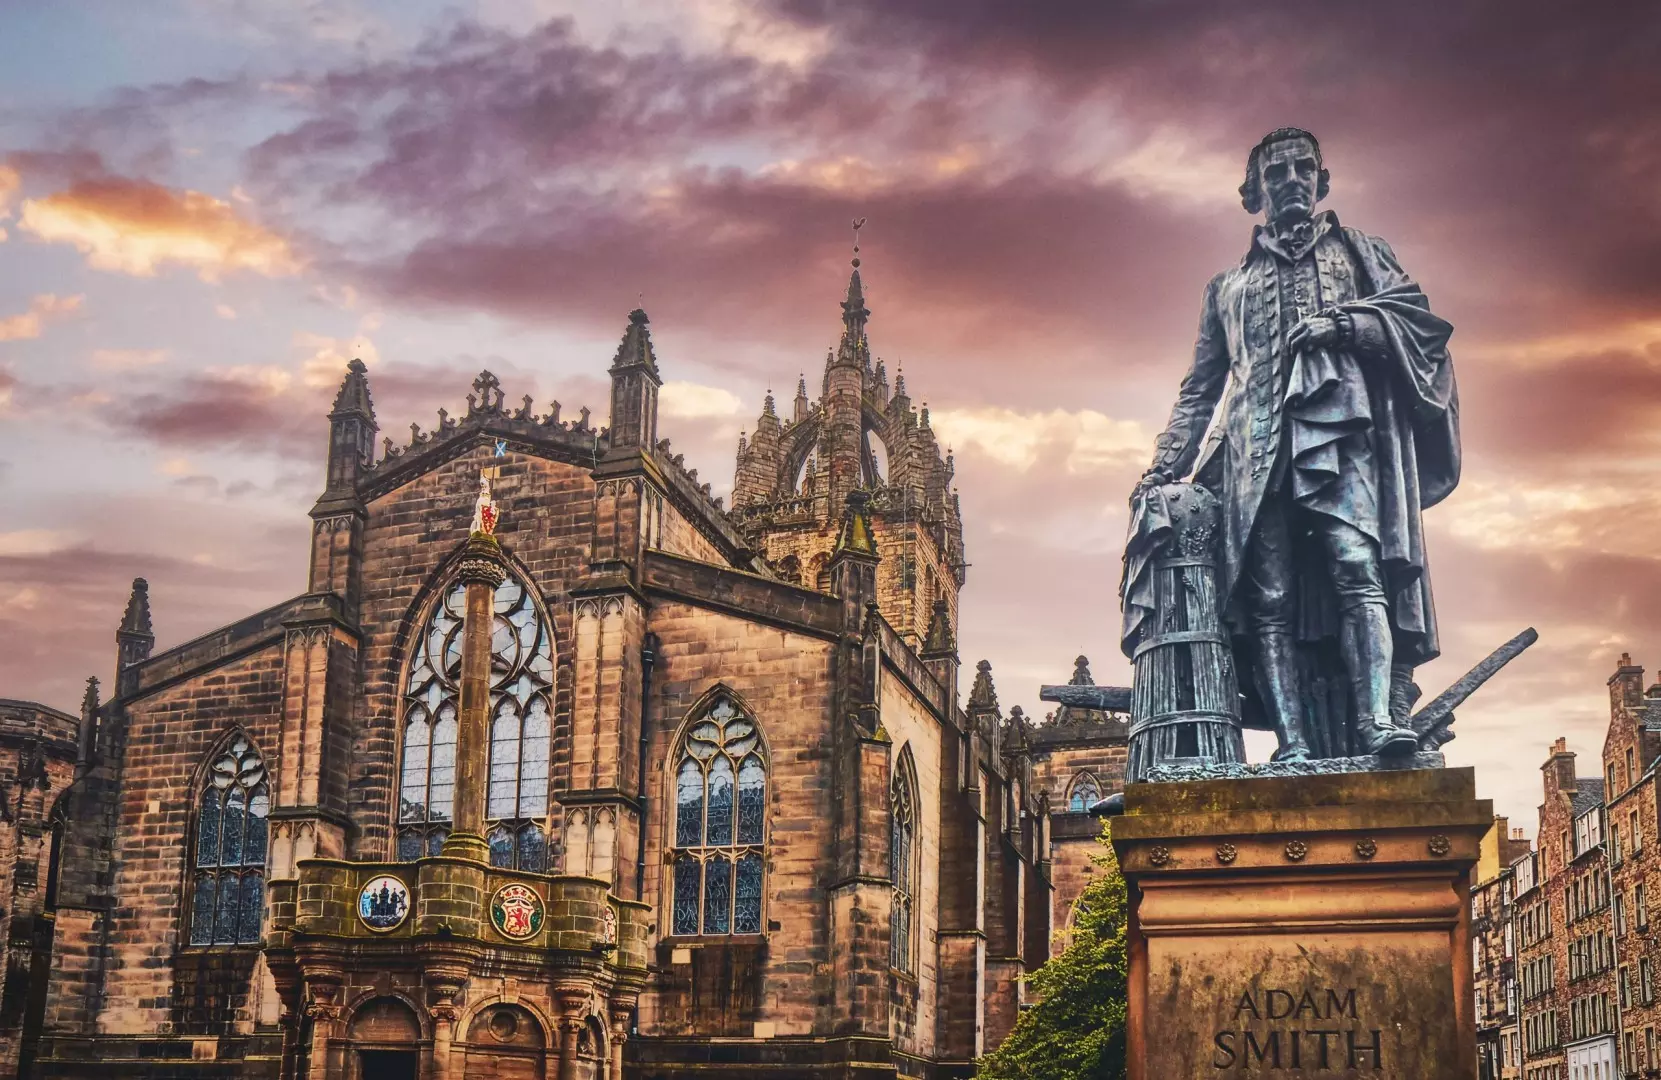 Adam Smith and Pin-making: Some Inconvenient Truths